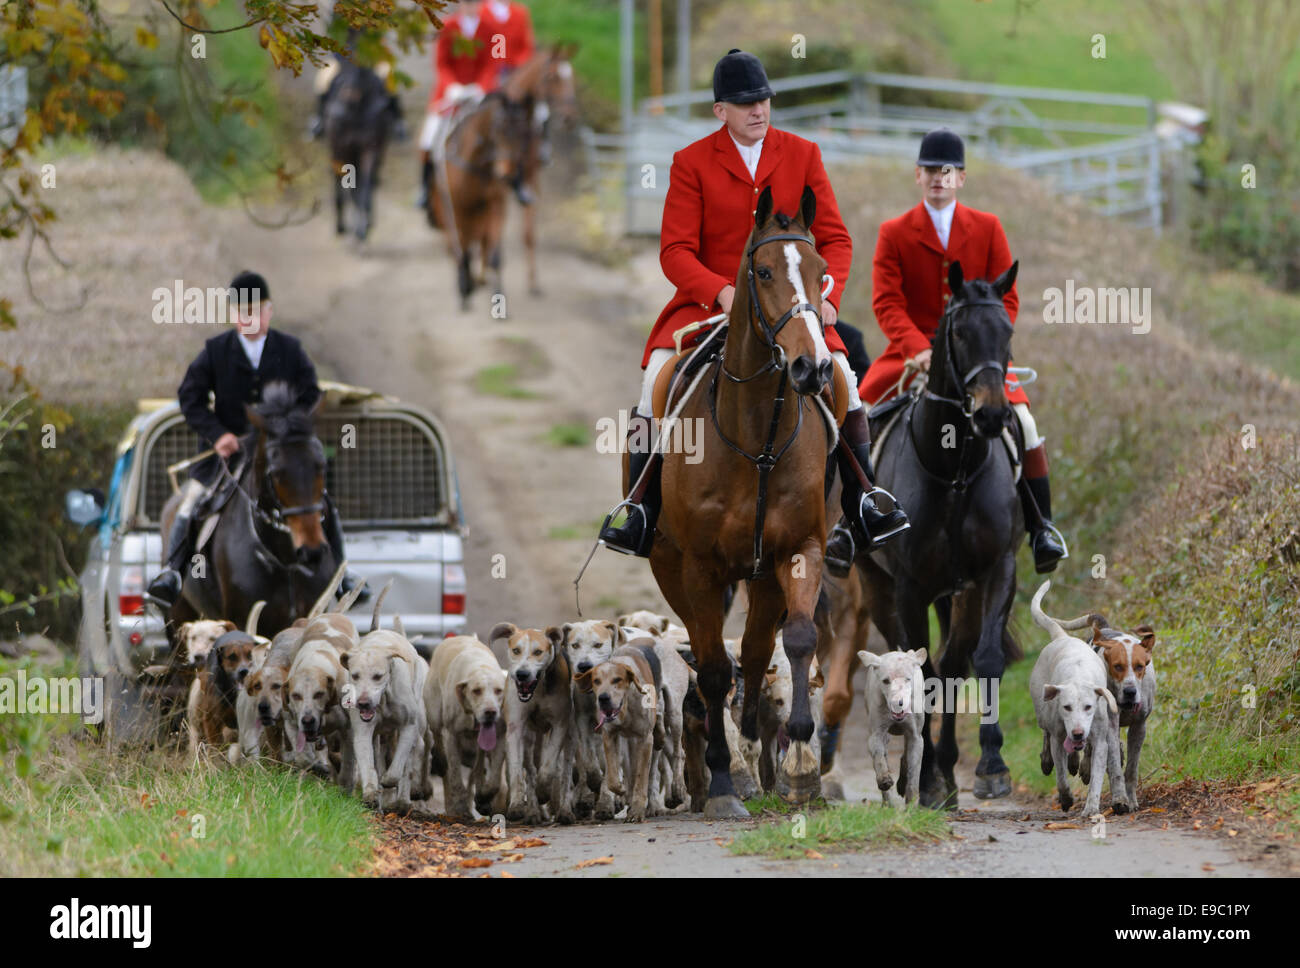 Leicestershire, UK. 24th October, 2014. Huntsman Peter Collins and the Quorn fox hounds -The start of the fox hunting season - Quorn Hunt Opening Meet at The Kennels. Credit:  Nico Morgan/Alamy Live News Stock Photo